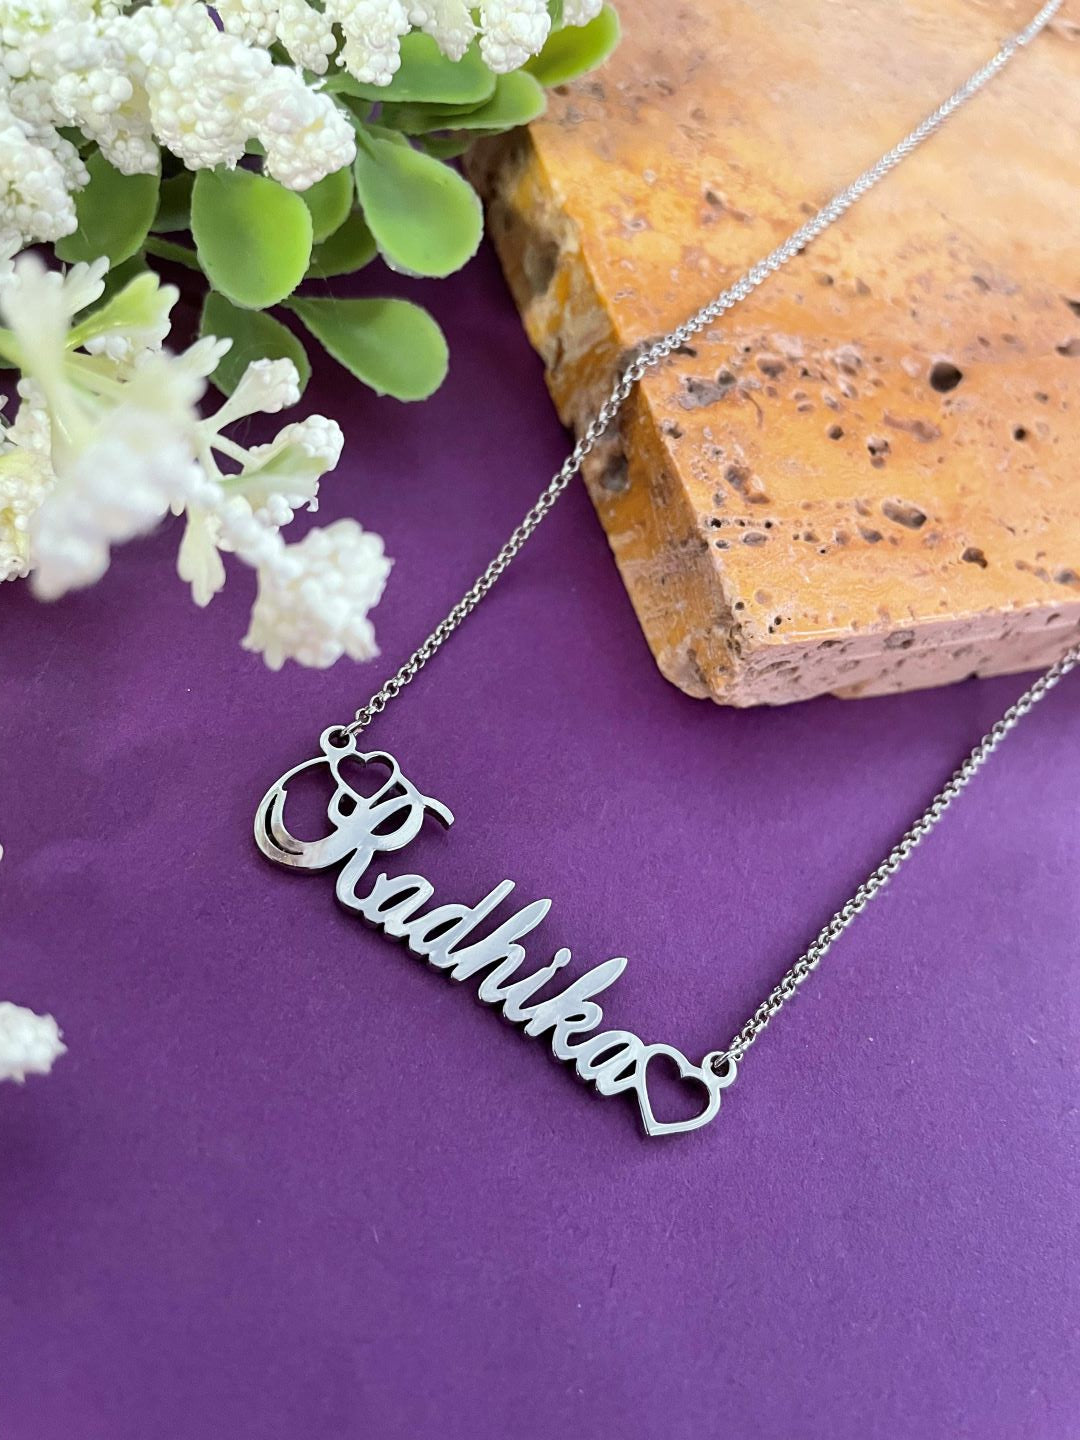 Cursive Silver Plated Name Necklace With 2 Hearts